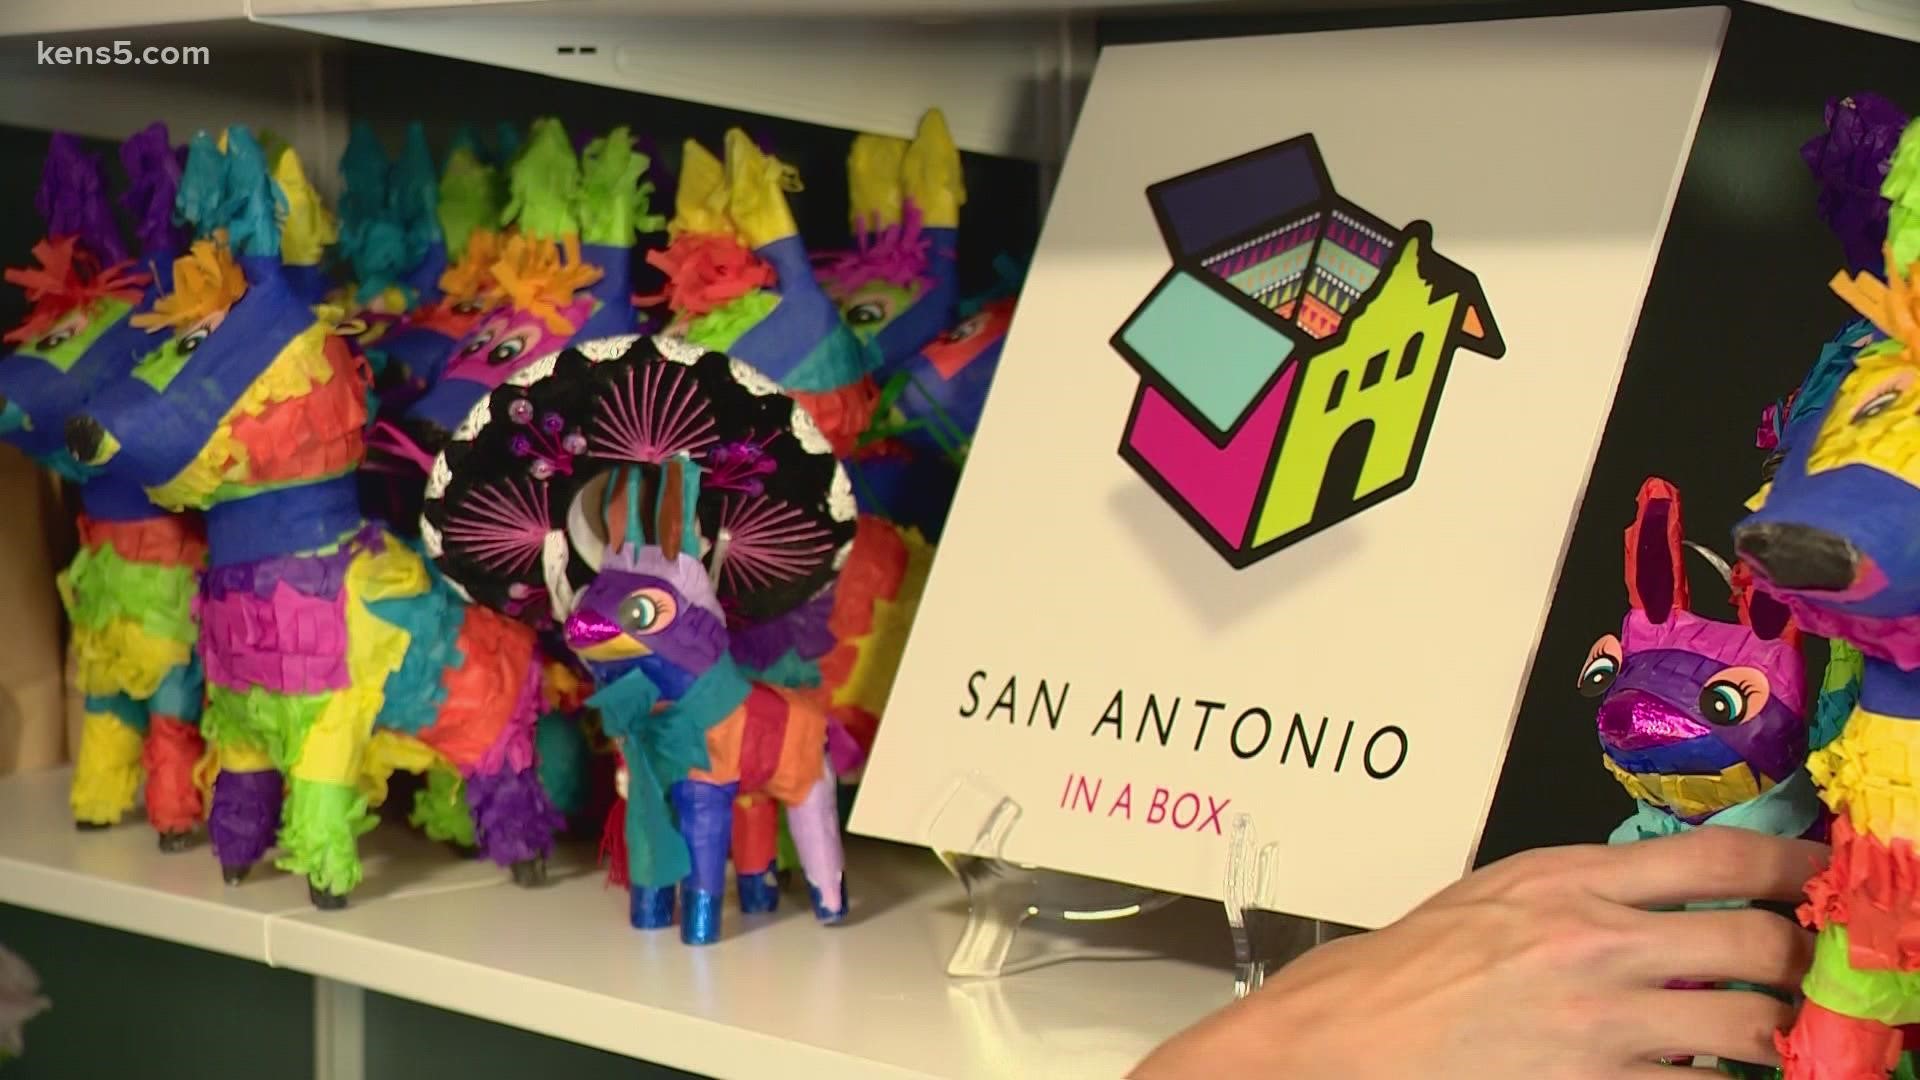 You can get a taste of San Antonio, shipped right to your doorstep. The idea came to the owner when she got married and put together gift boxes for her guests.